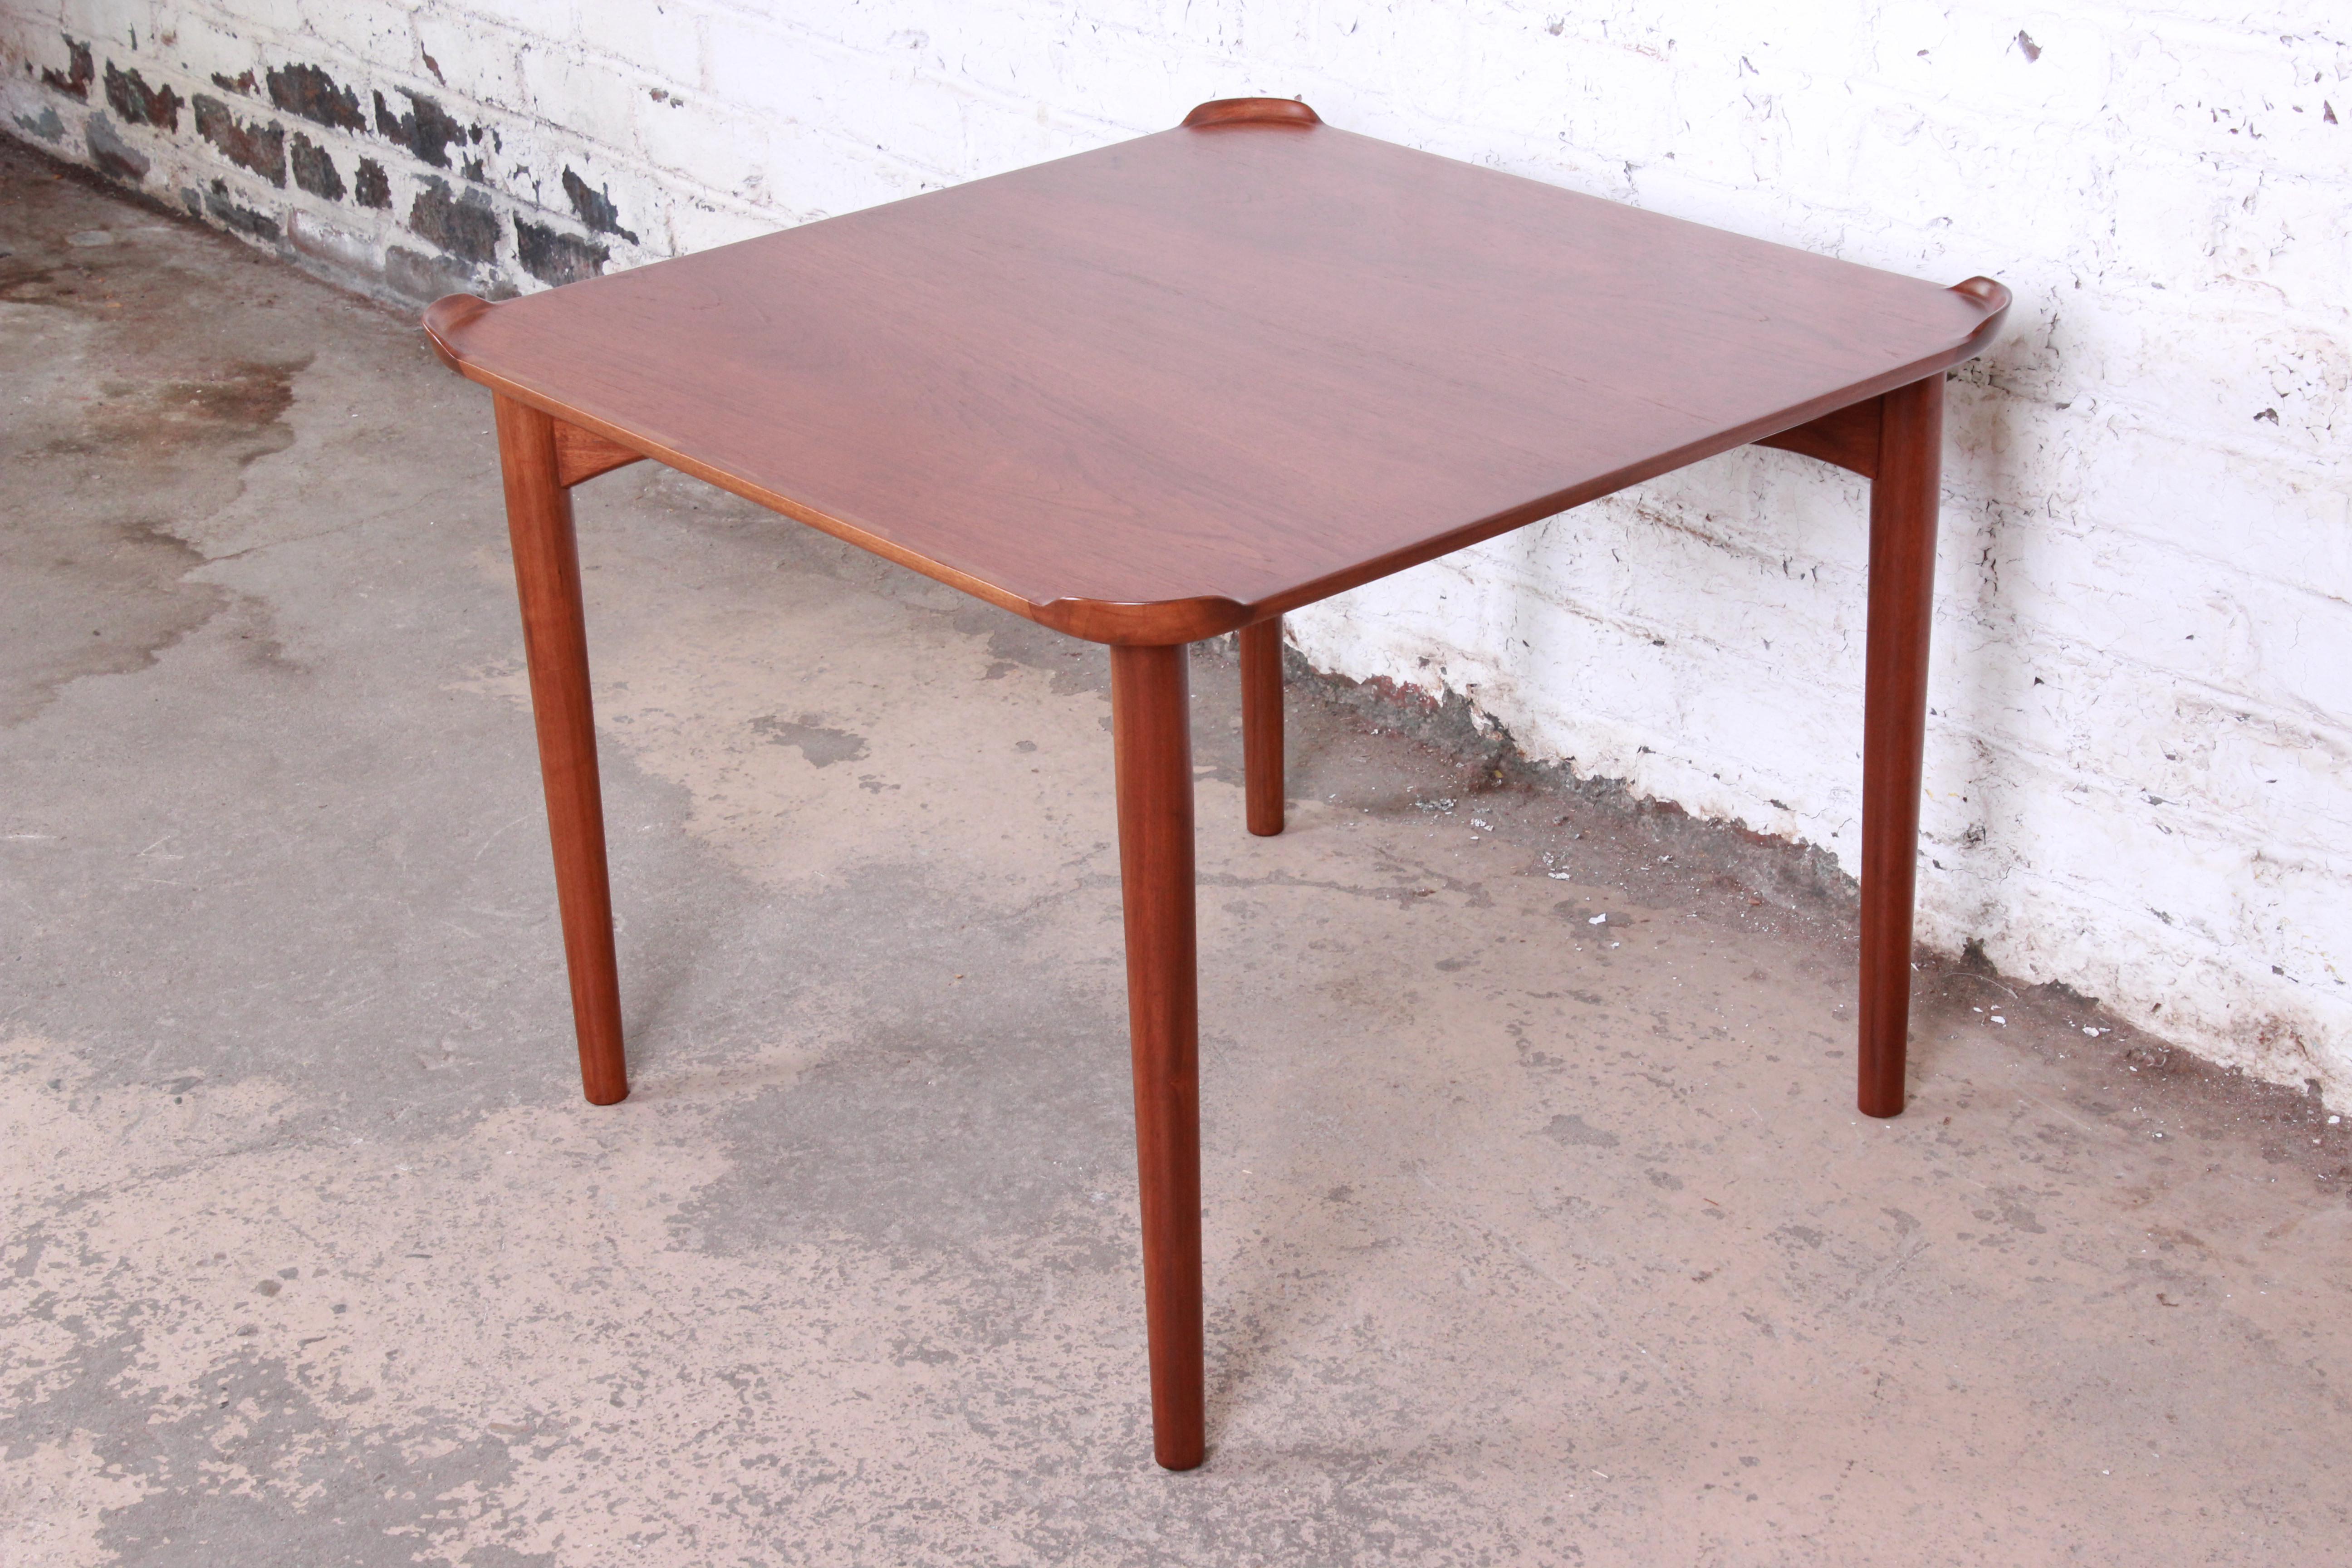 A handsome teak game table designed by Danish architect Finn Juhl for Baker Furniture. The table features stunning teak wood grain and unique carved corner drink backsplashes. Minimalist mid-century Danish Modern design at its finest. The table has